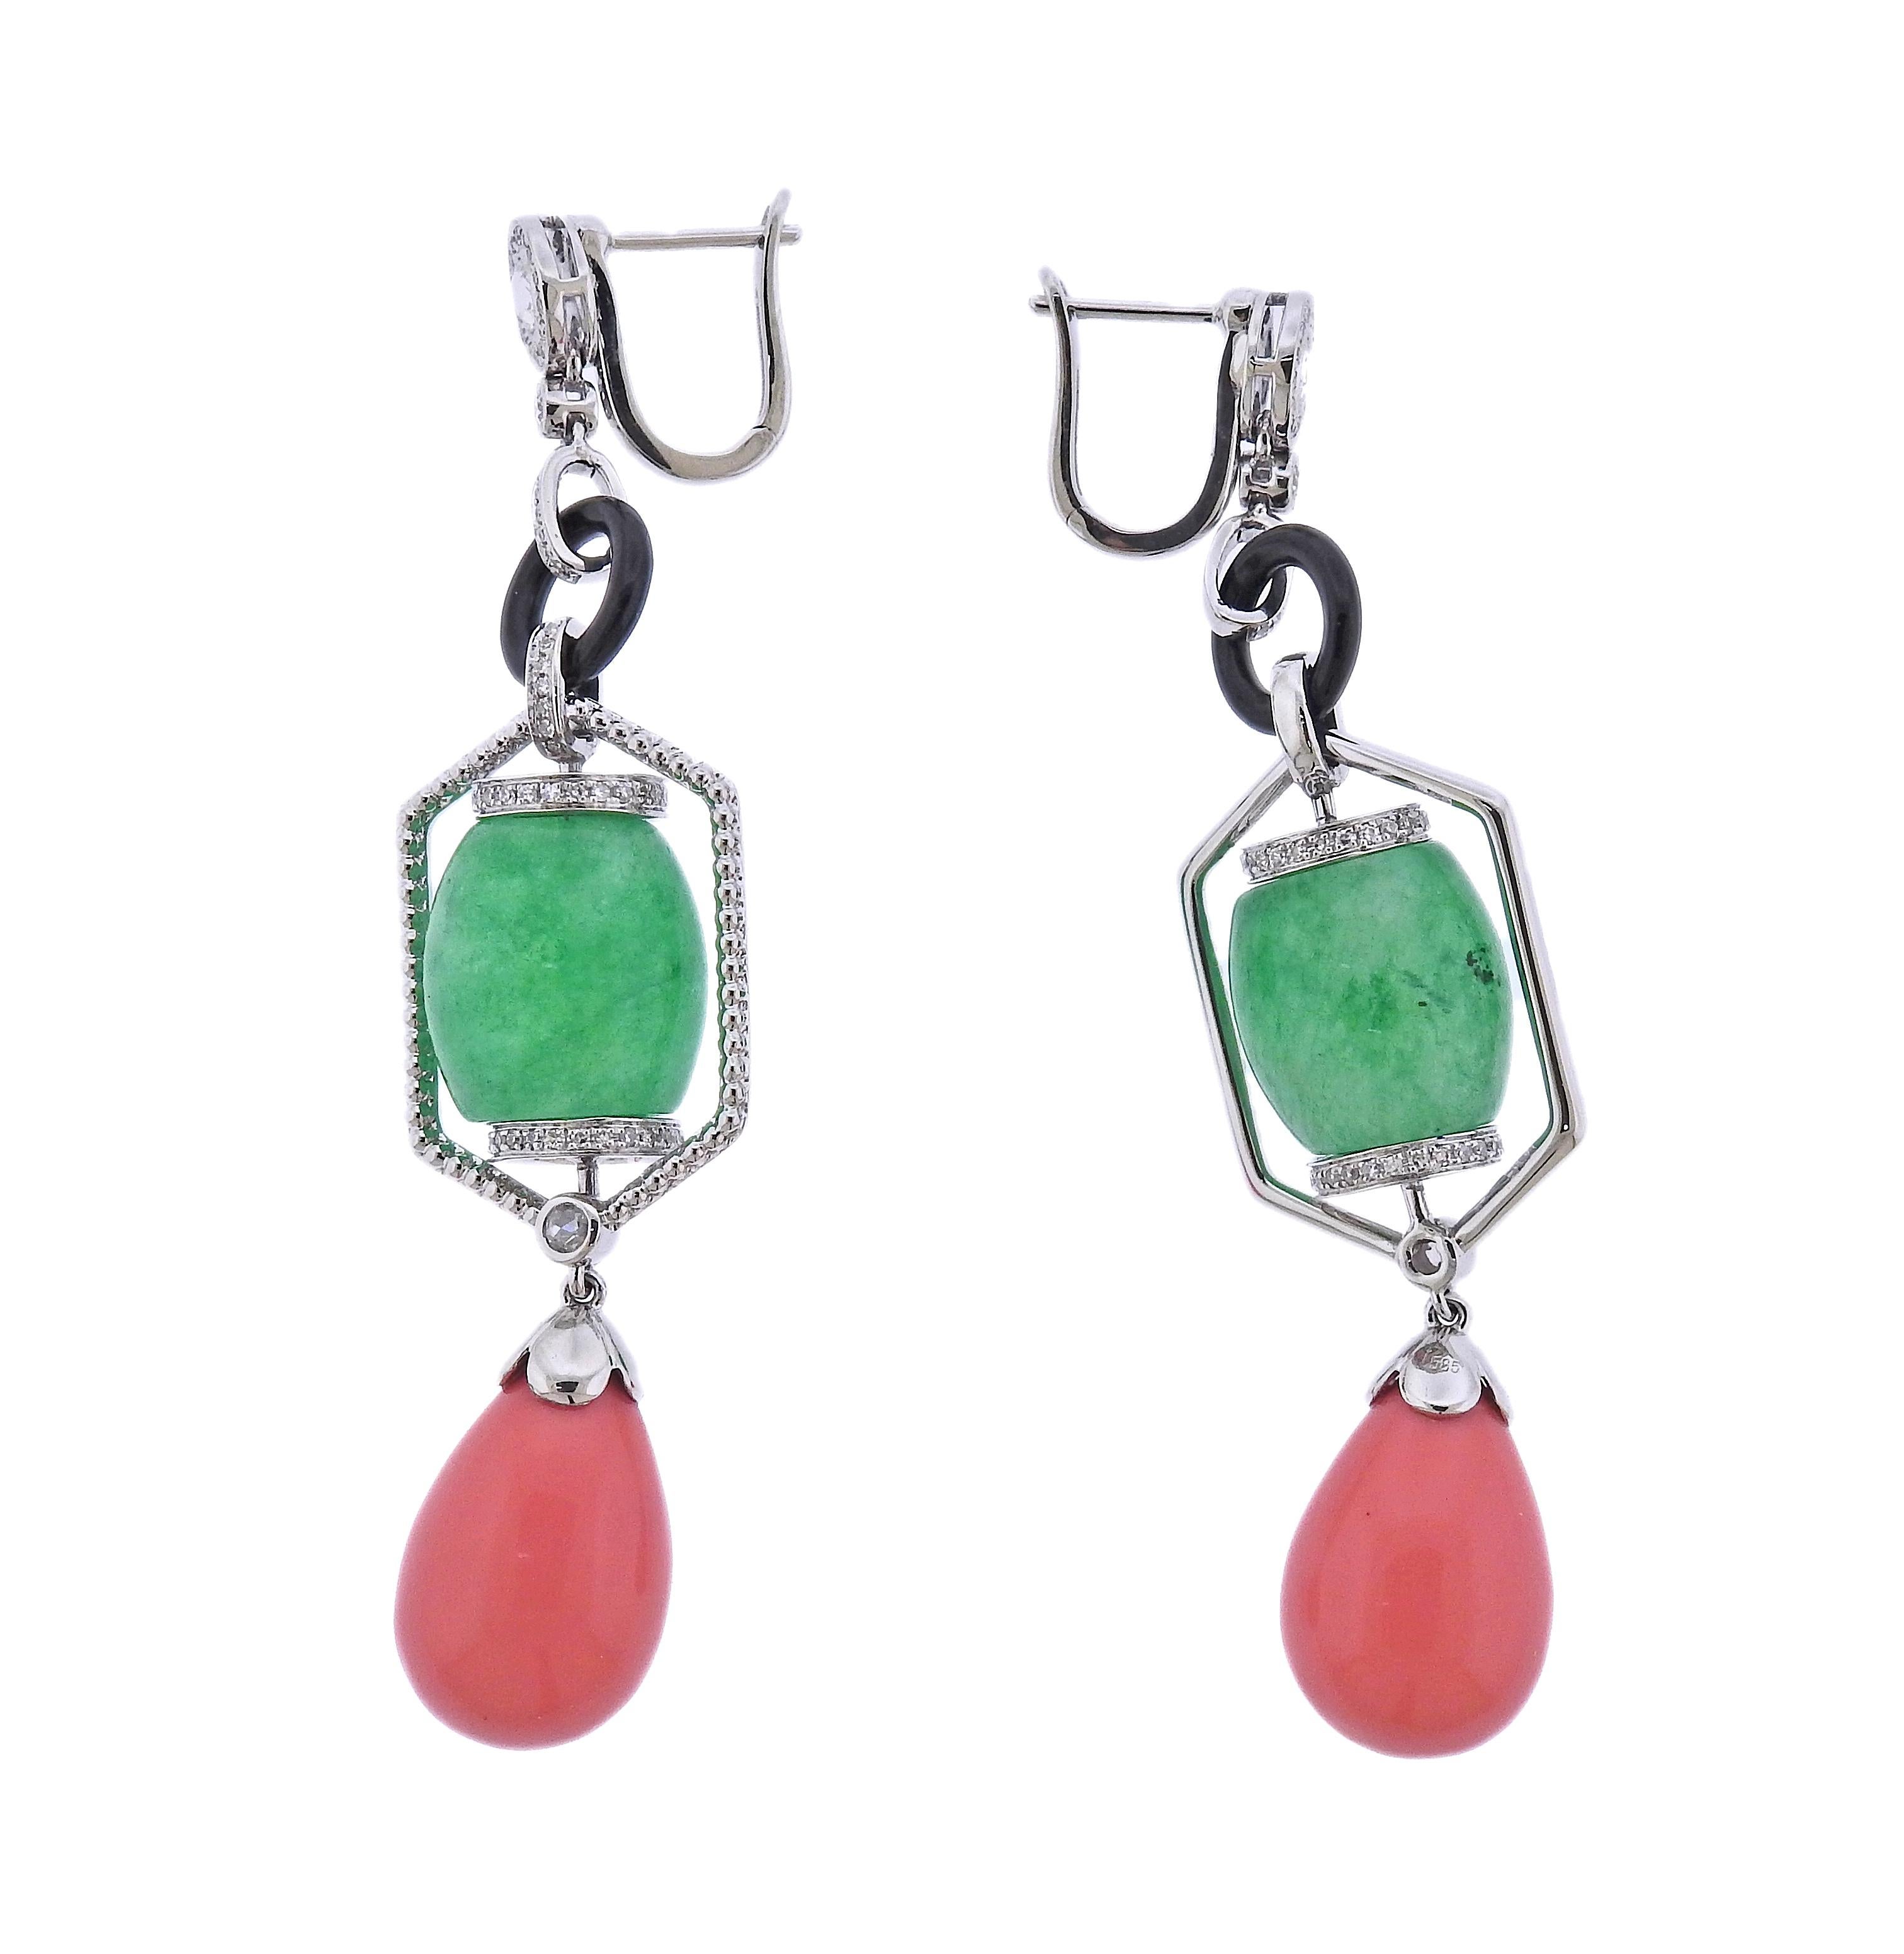 Pair of 14k gold long drop earrings, with 28.82ctw jadeite jade , 17.50ctw coral, onyx and 0.79ctw in diamonds. Earrings are 72mm long. Marked 585. Weight - 21.7 grams.